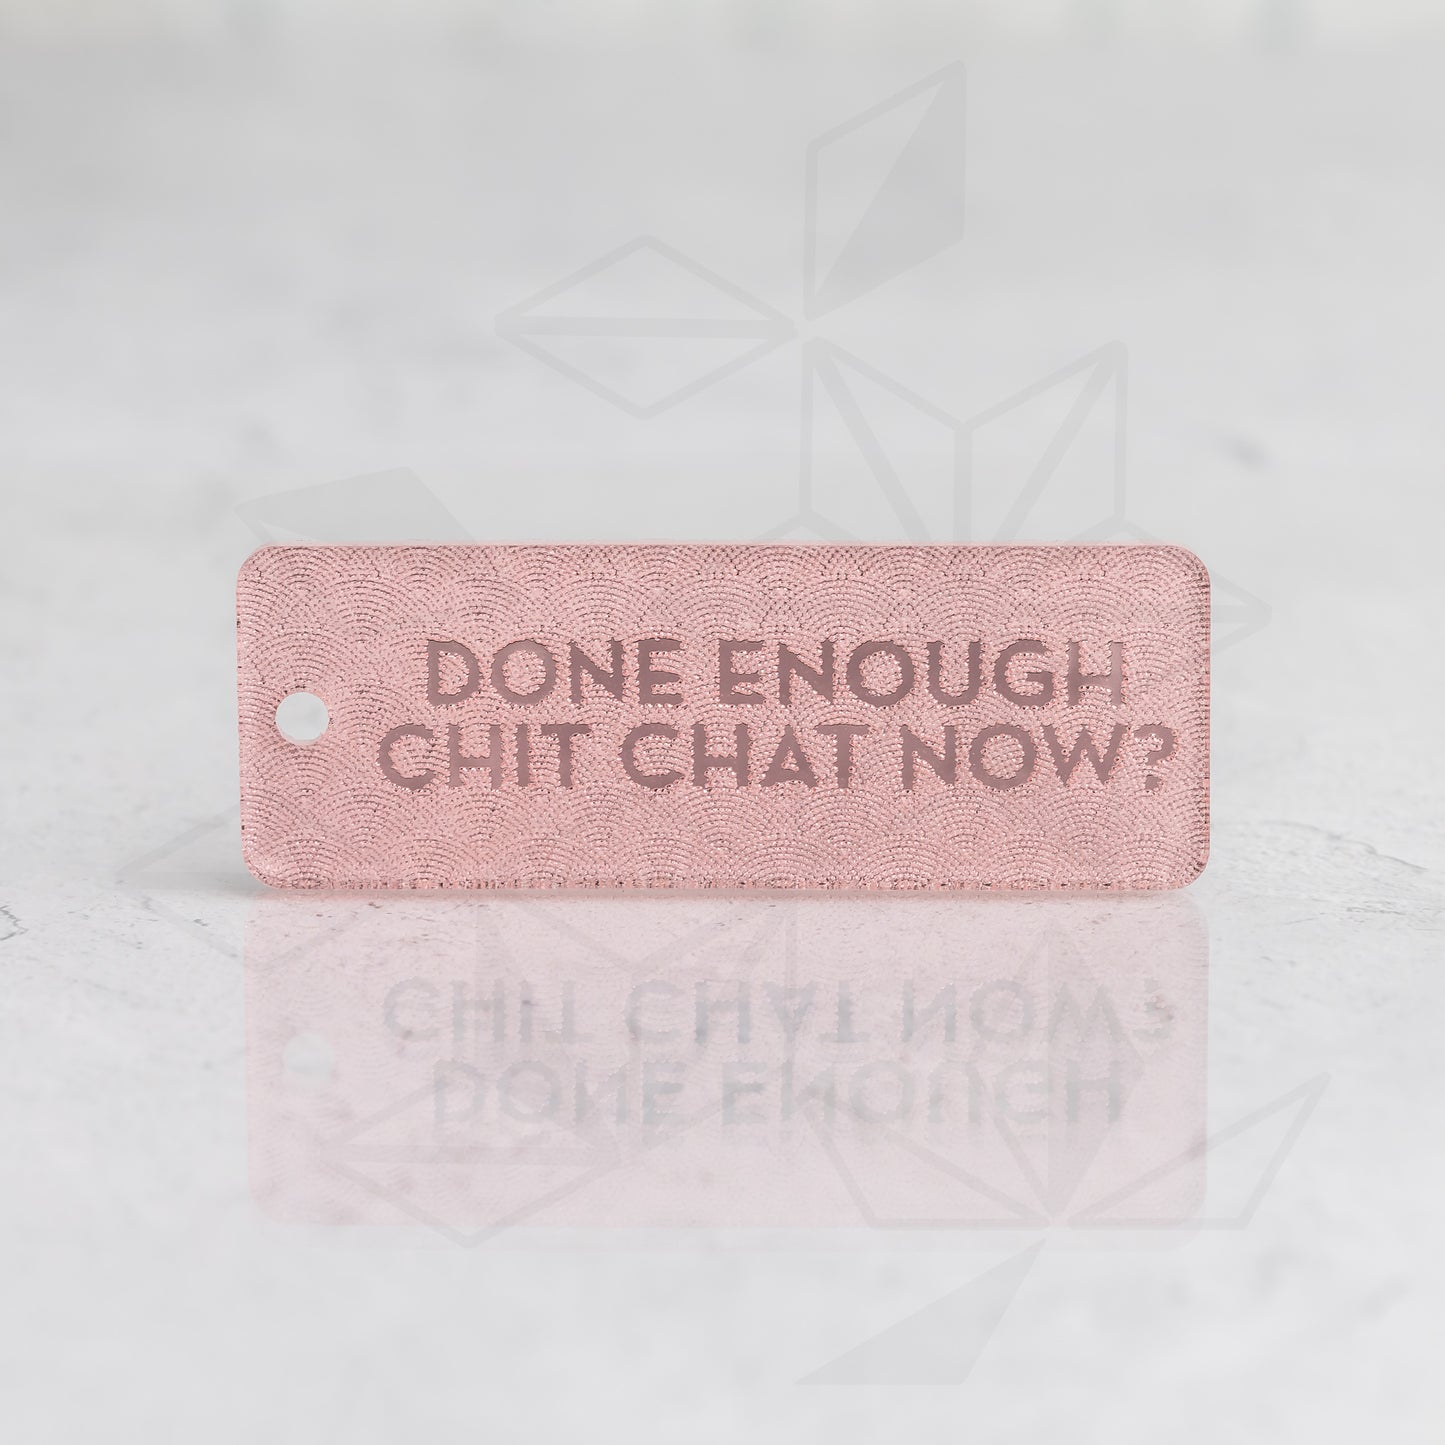 Keychains - Enough Chit Chat